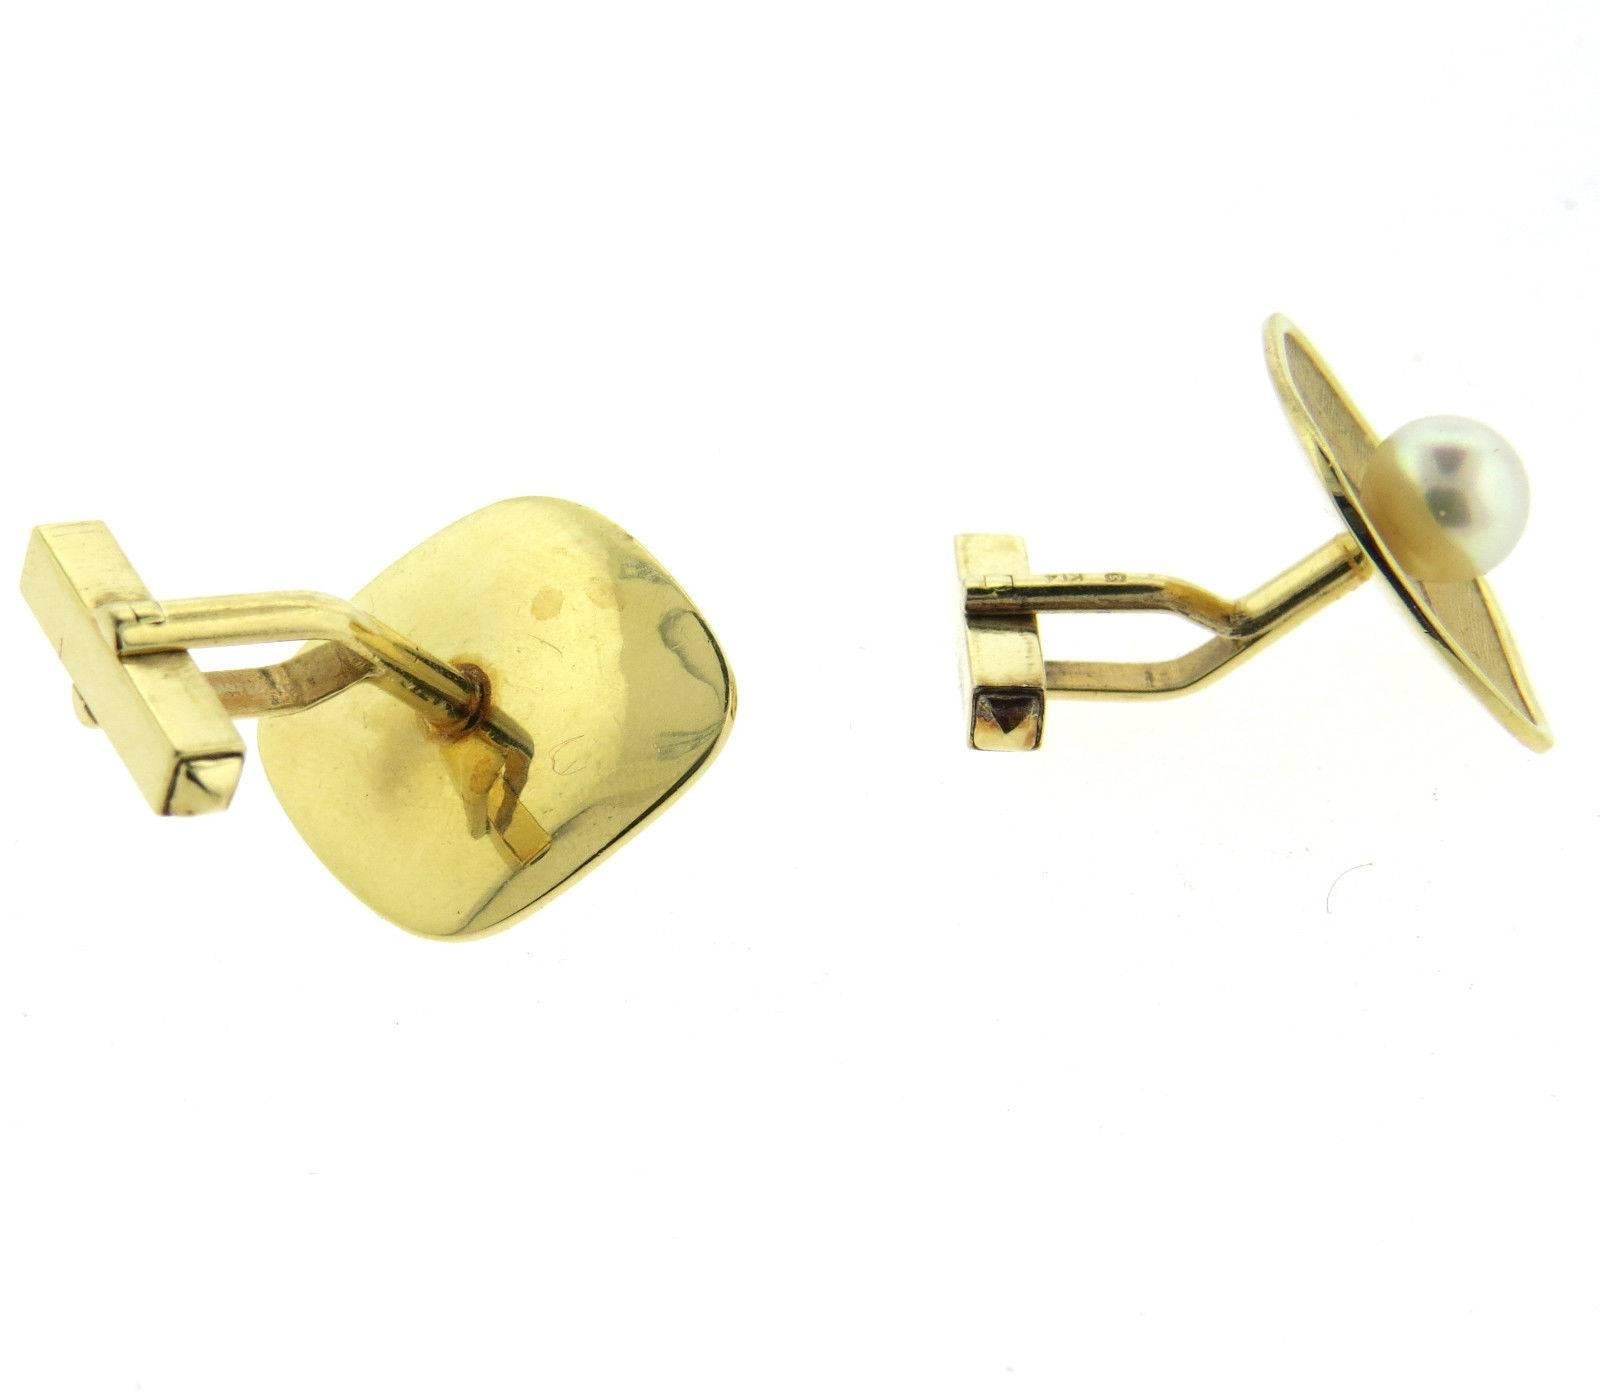 A pair of 14k yellow gold cufflinks set with 7.3mm saltwater cultured pearls.  Crafted by Mikimoto, the cufflinks measure 23mm x 19mm and weigh 12.3 grams. Marked: k14, M hallmark.
